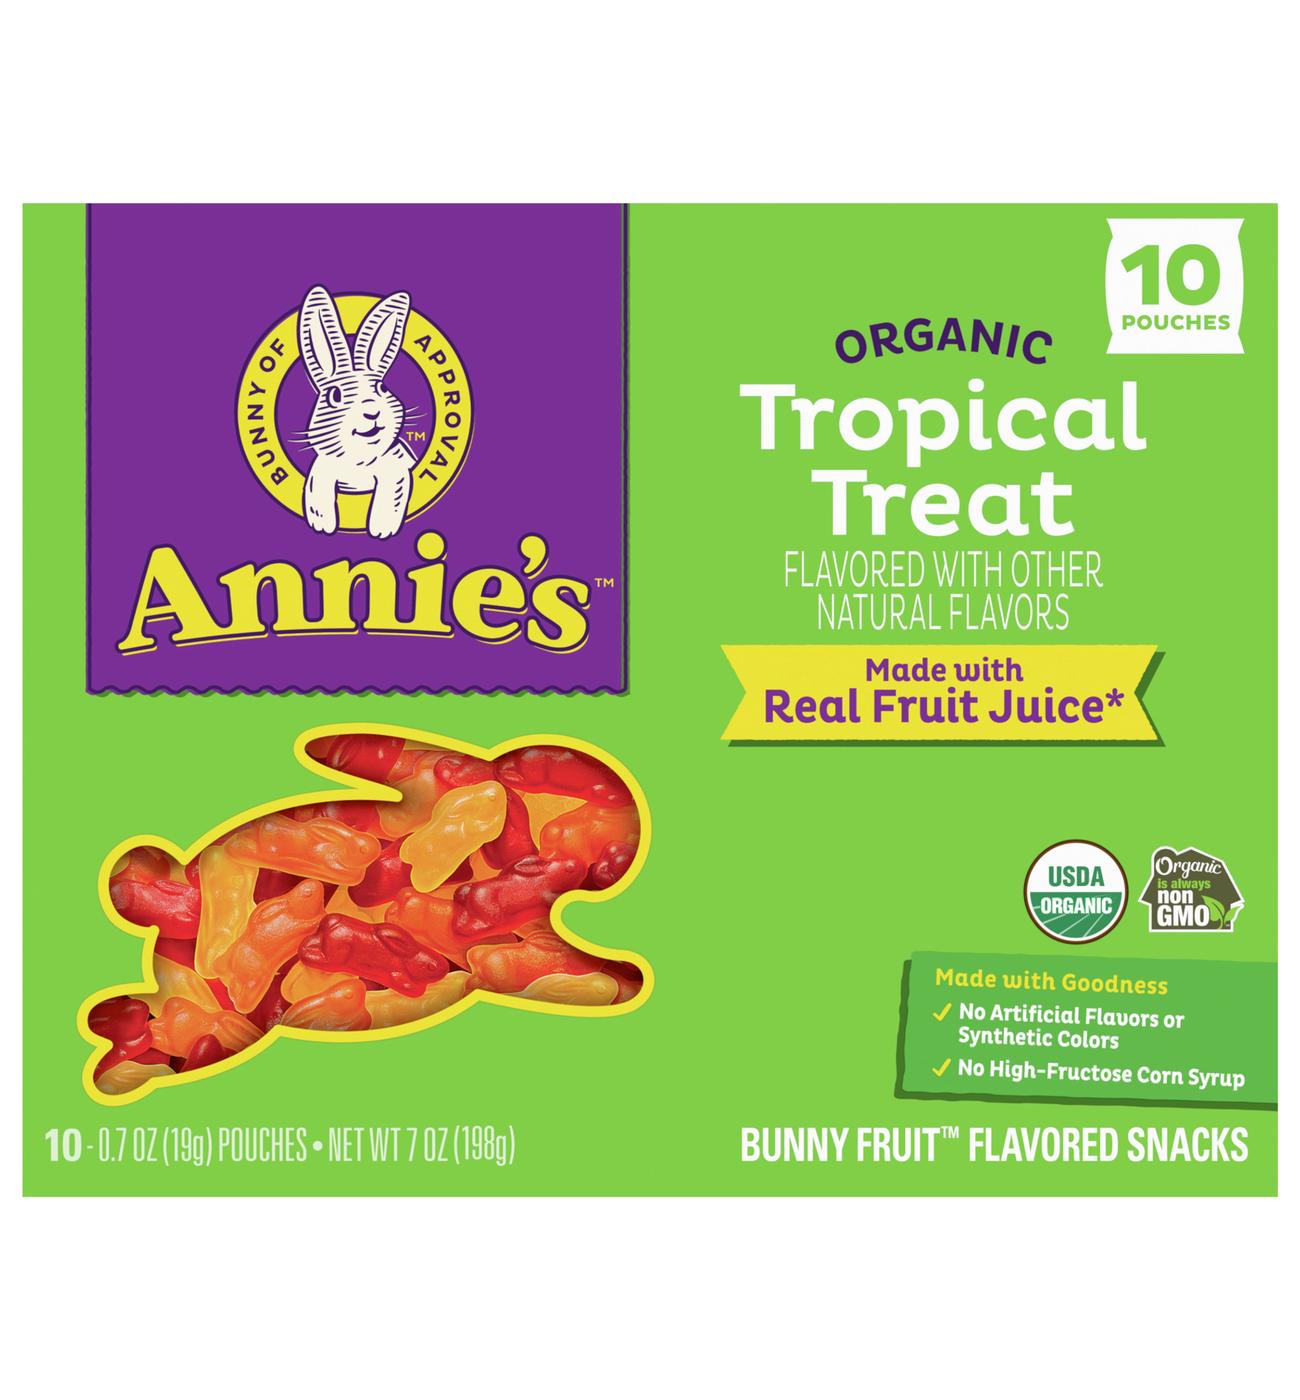 Annie's Organic Tropical Bunny Fruit Snacks; image 1 of 3